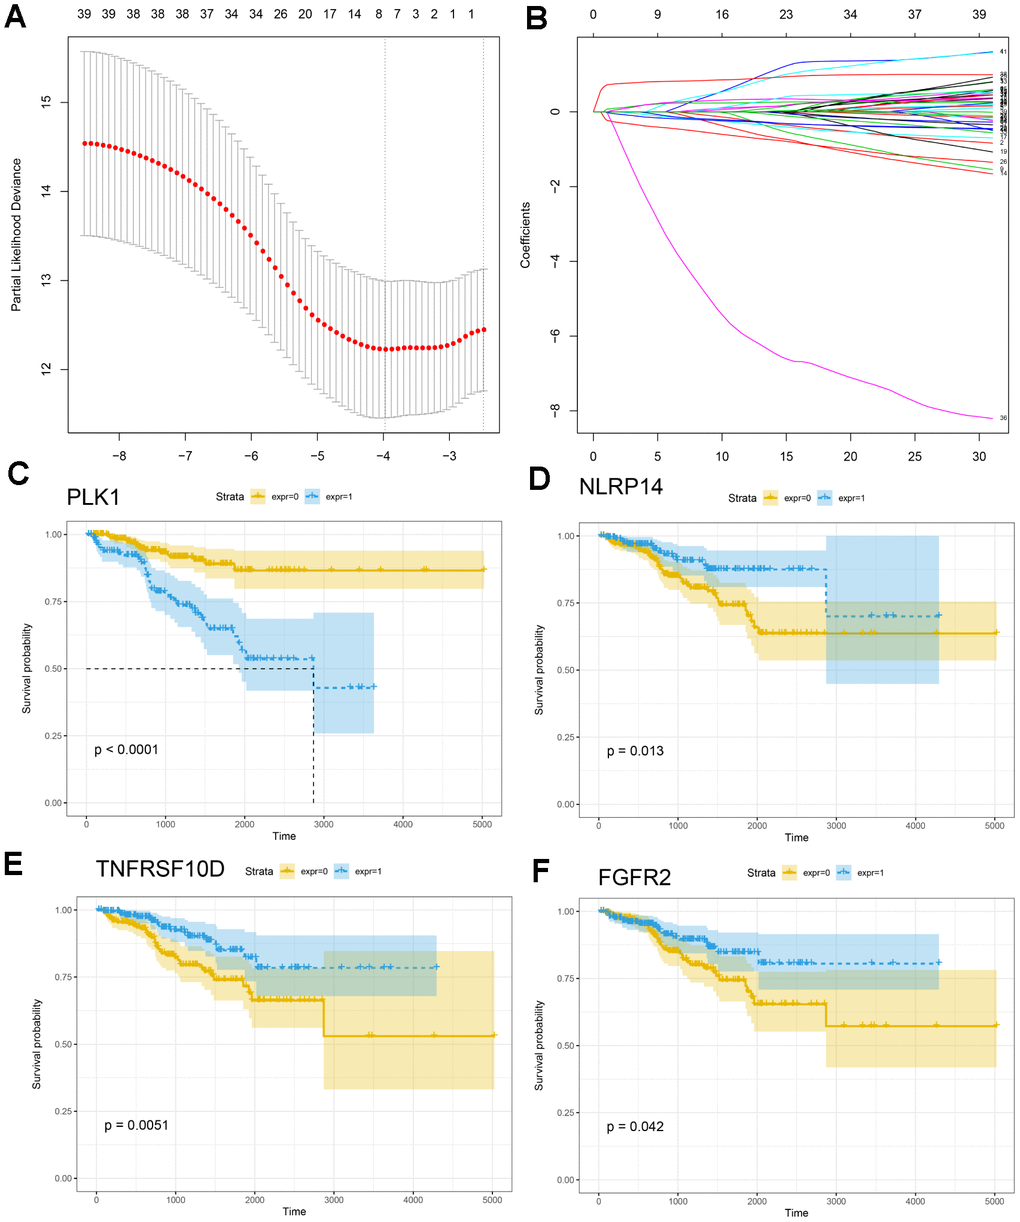 Construction of the IRG-based prognostic model. (A, B) The number of factors included in the model was determined through LASSO analysis. (C–F) KM curves for PLK1, NLRP14, TNFRSF10D, and FGFR2.